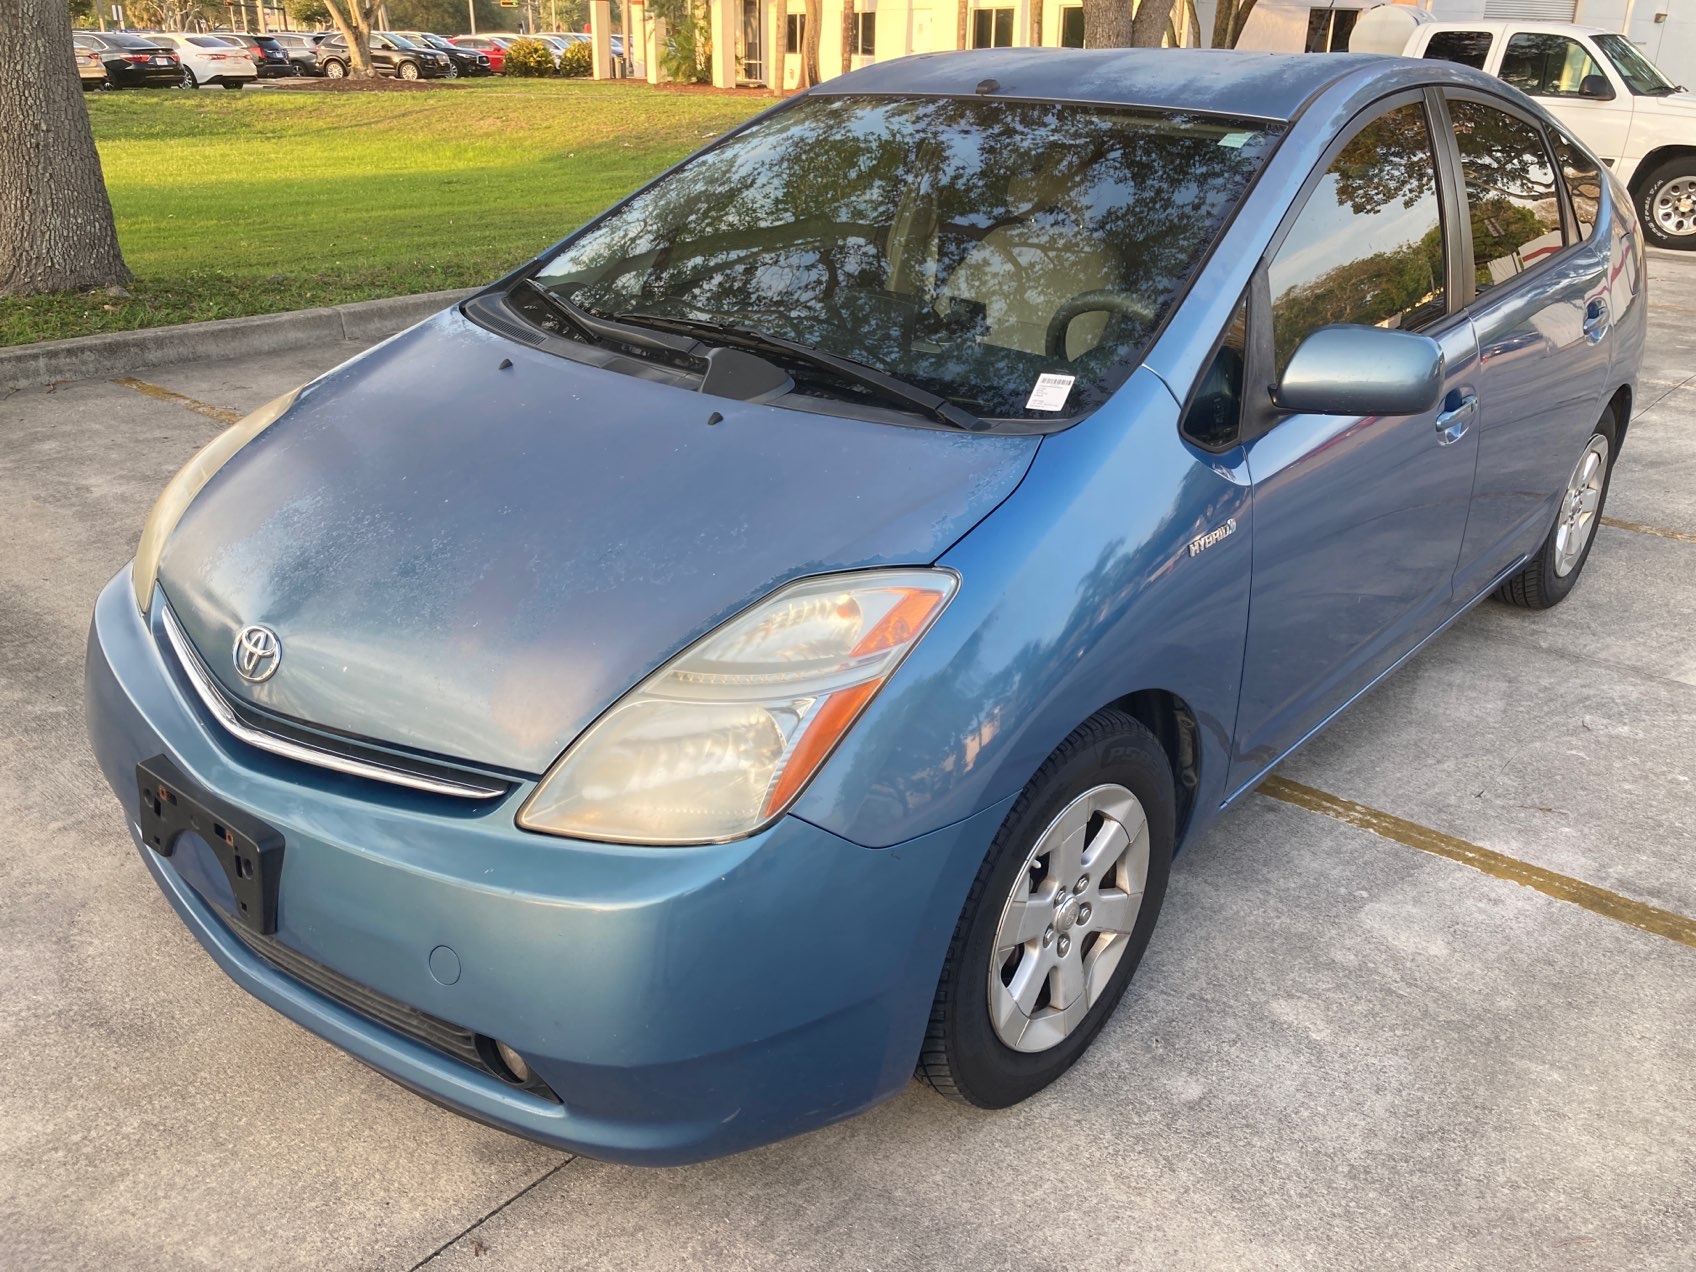 Used 2006 TOYOTA PRIUS for sale in MARGATE | 127402